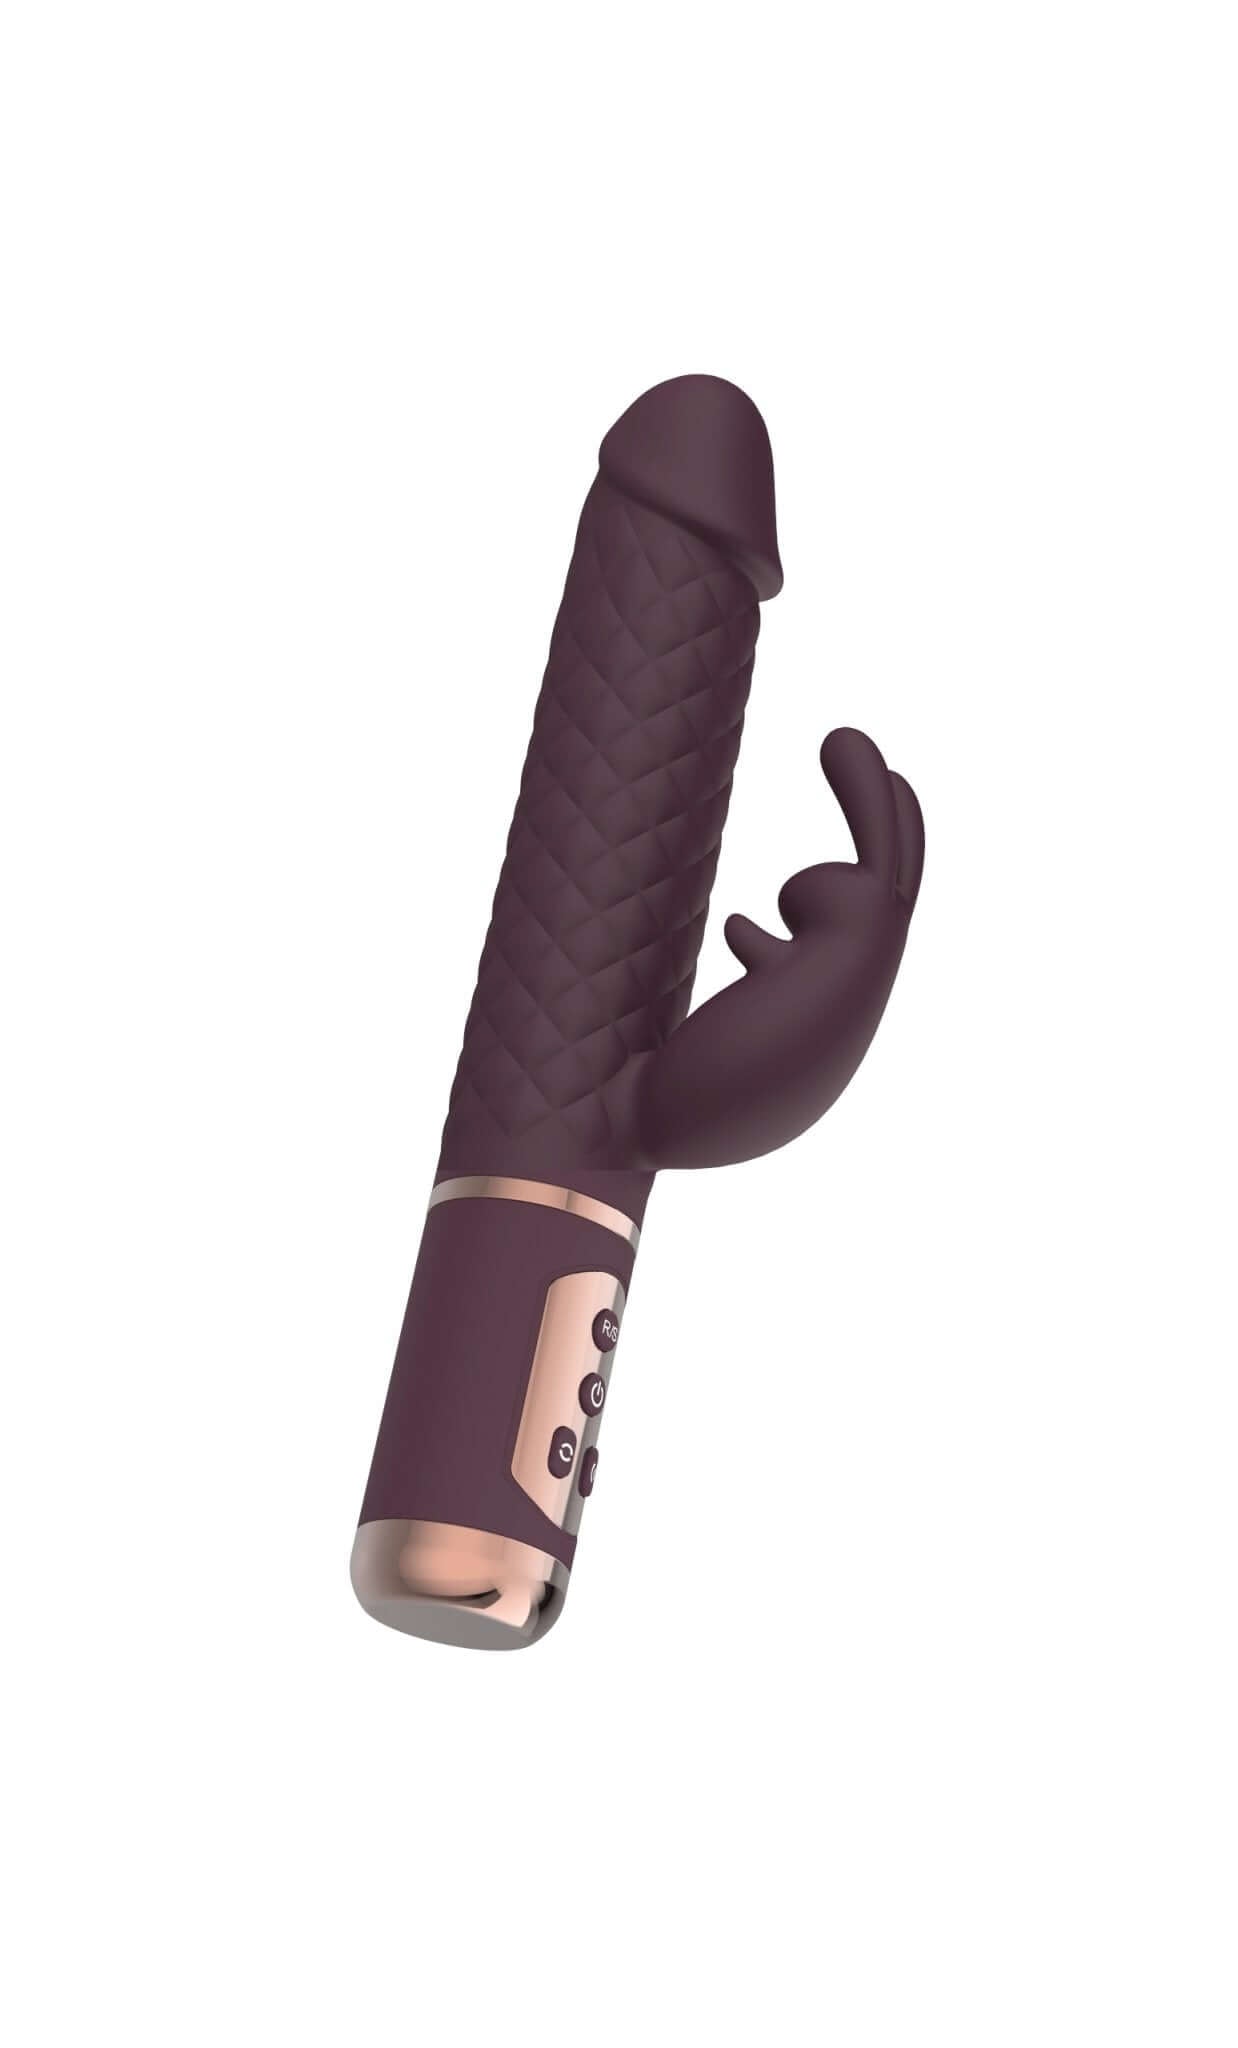 The Pleaser Rabbit Luxe G-Spot Vibrator - Stylish and efficient!